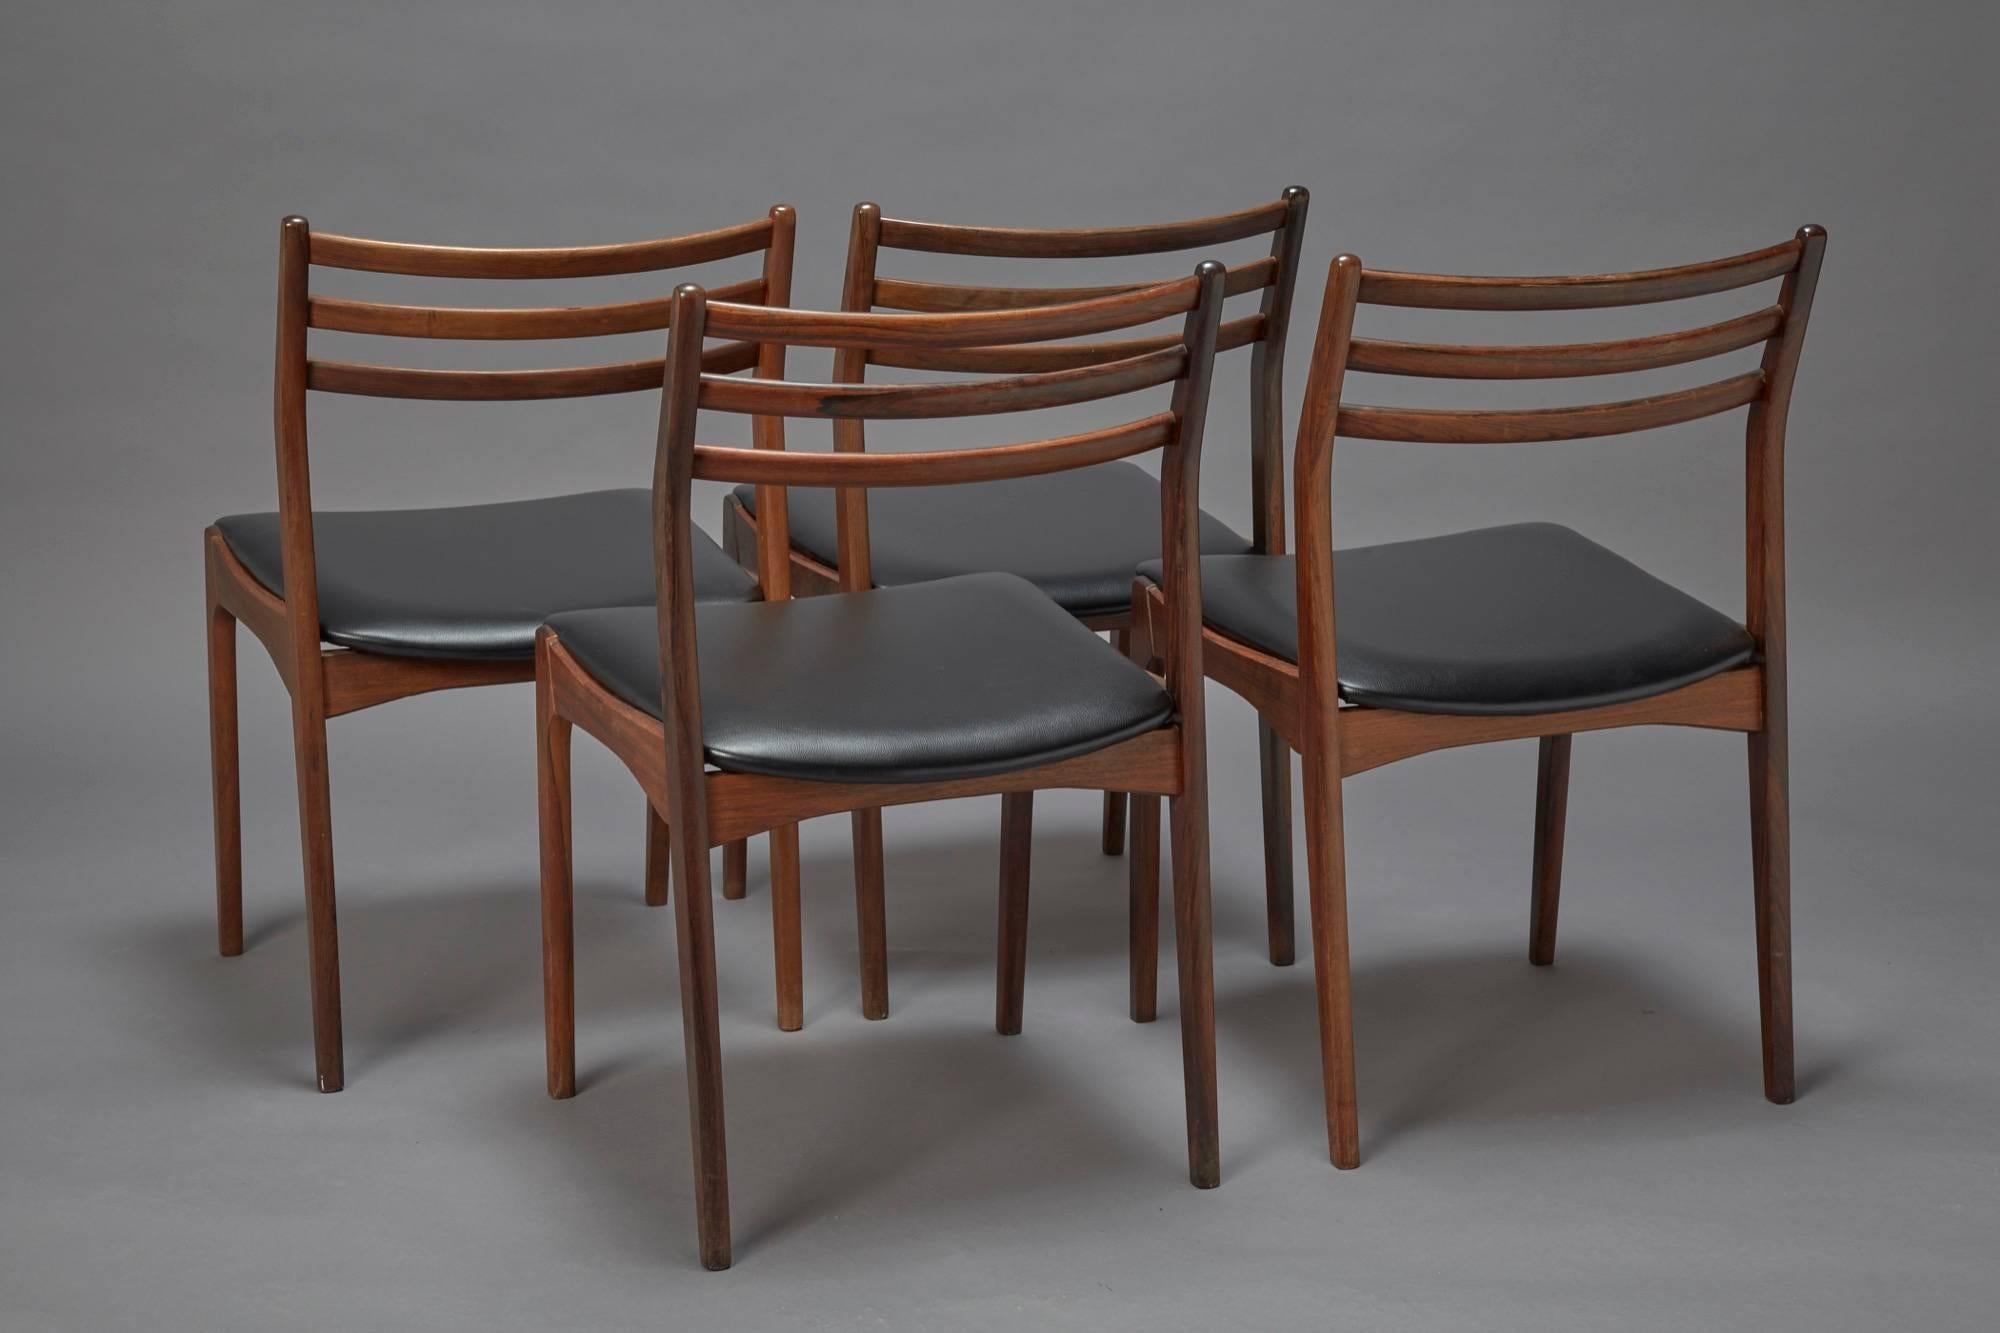 A set of four rosewood dining chairs attributed to Niels Otto Møller similar to his model 78 design, Denmark. Reupholstered in black faux leather, excellent condition.
  